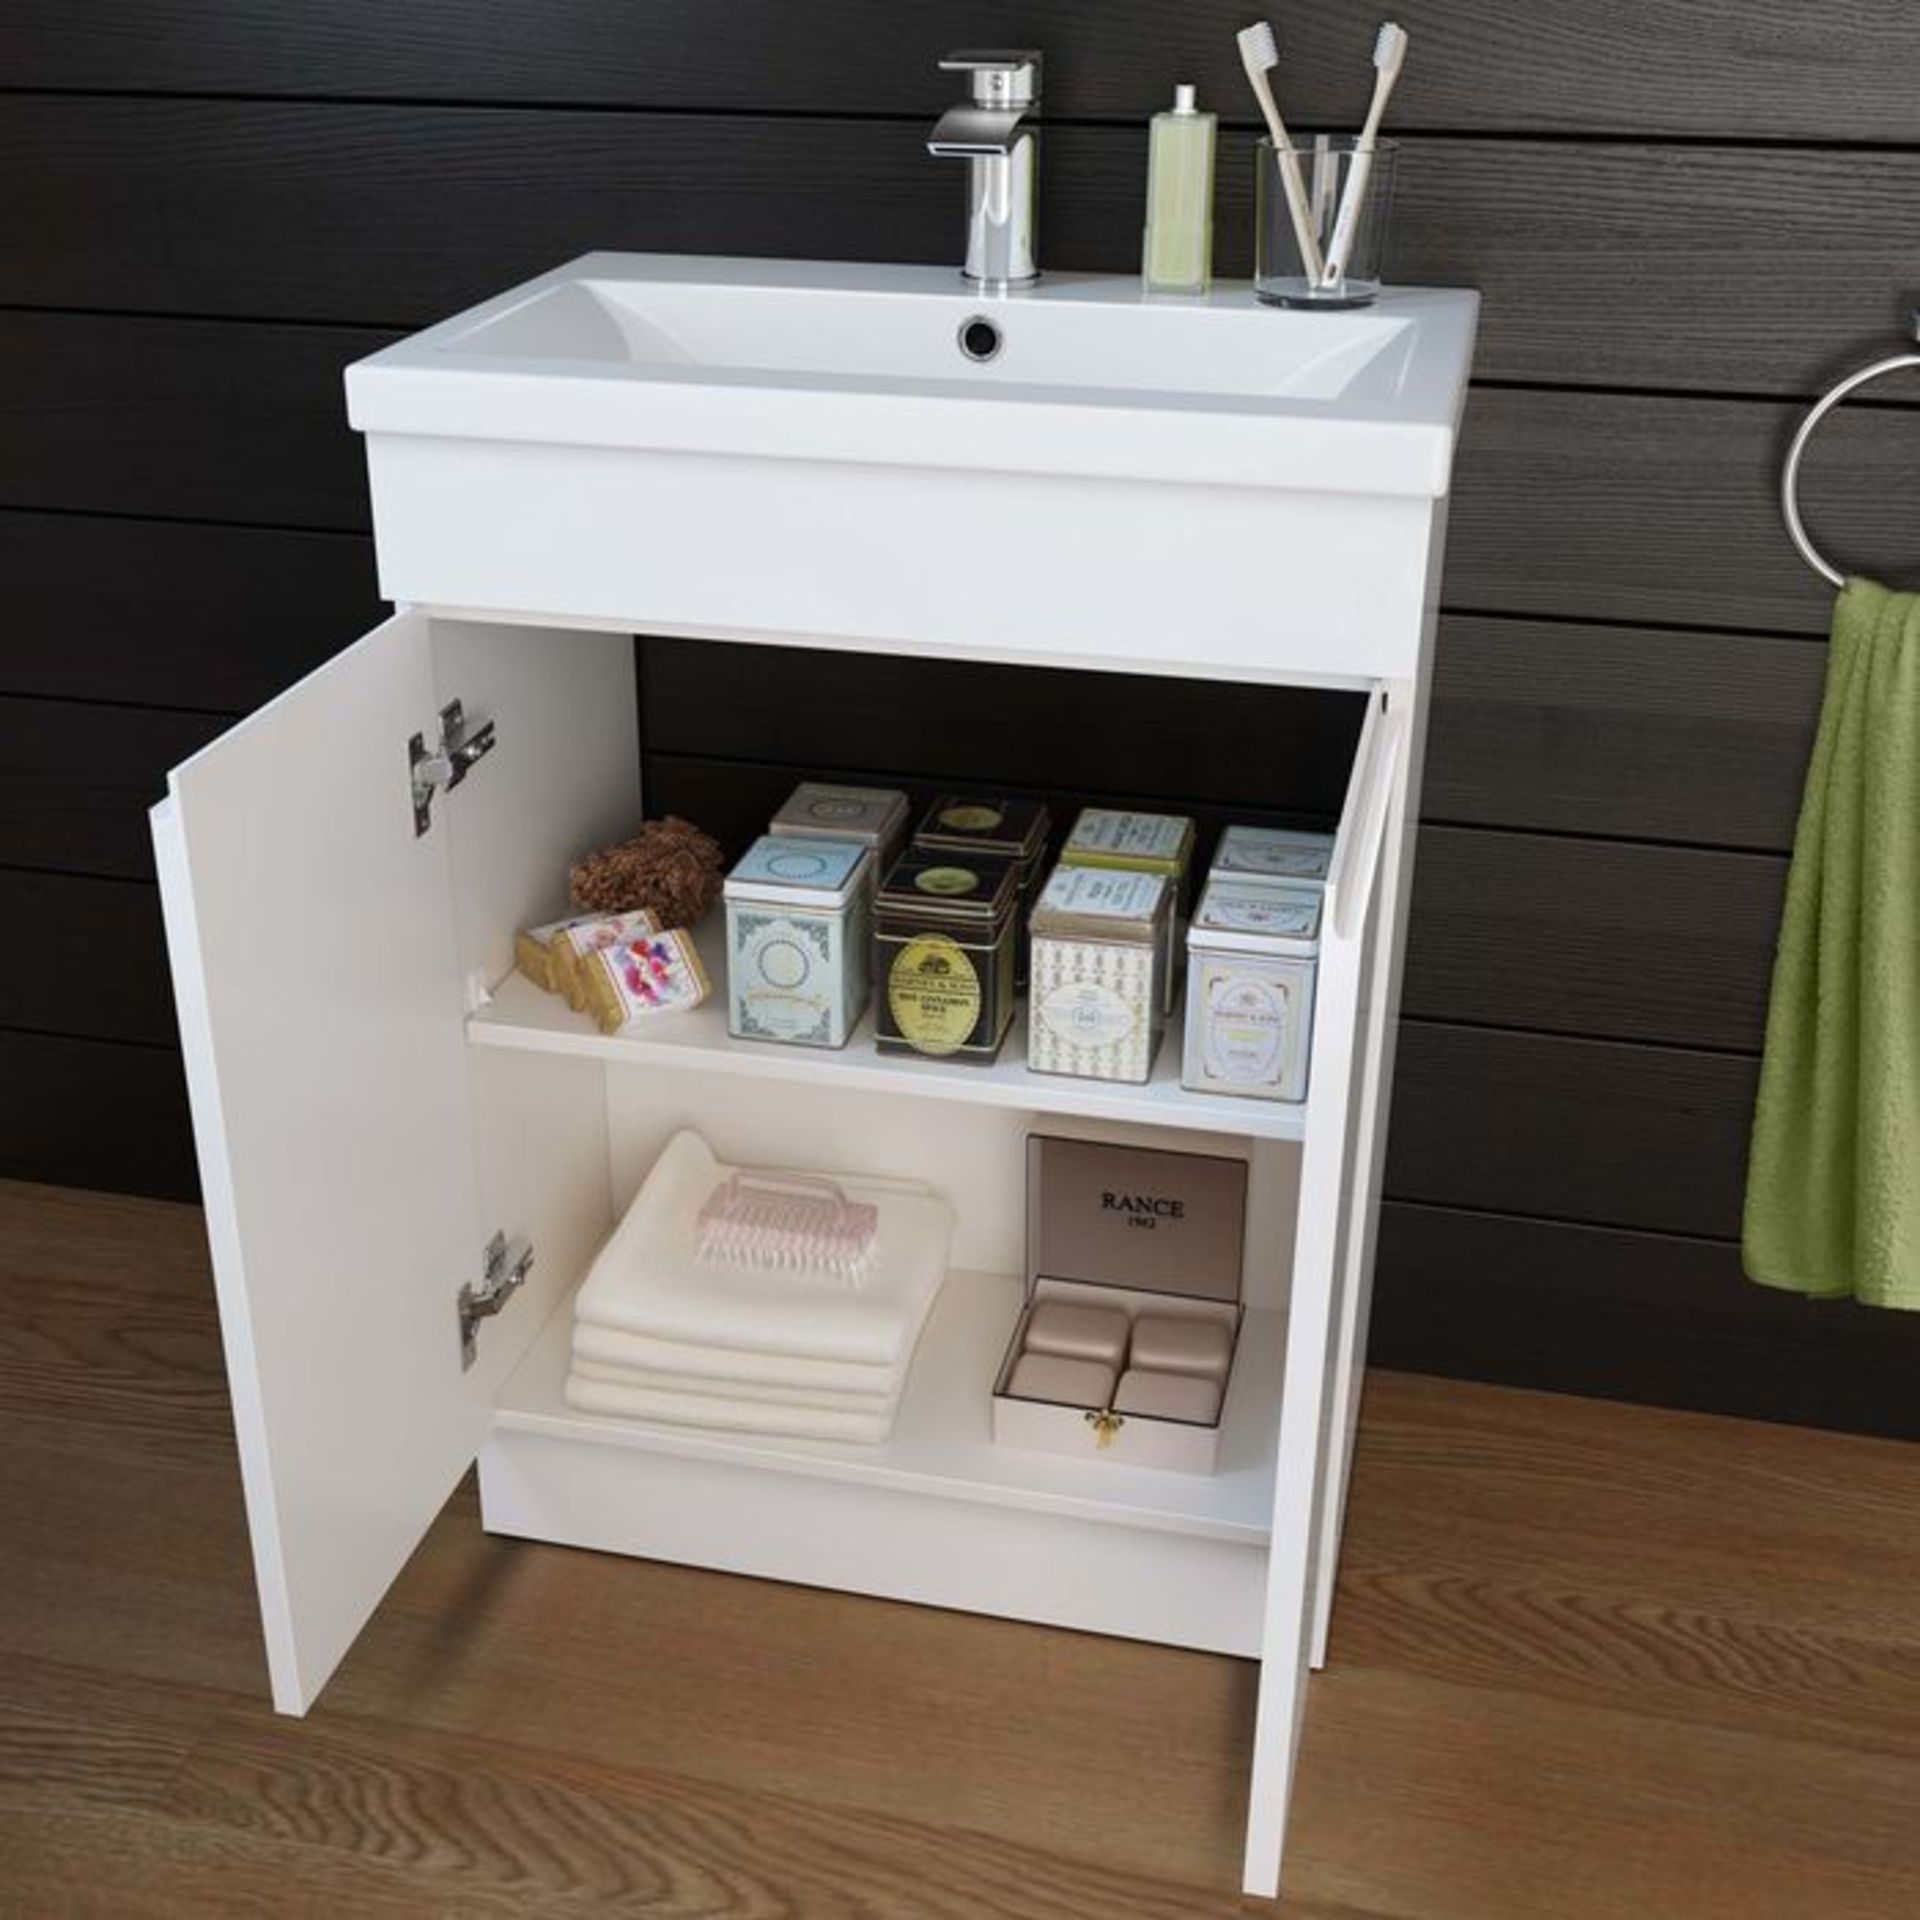 NEW & BOXED 600mm Trent Gloss White Sink Cabinet - Floor Standing.RRP £499.99.Comes complete w... - Image 2 of 3